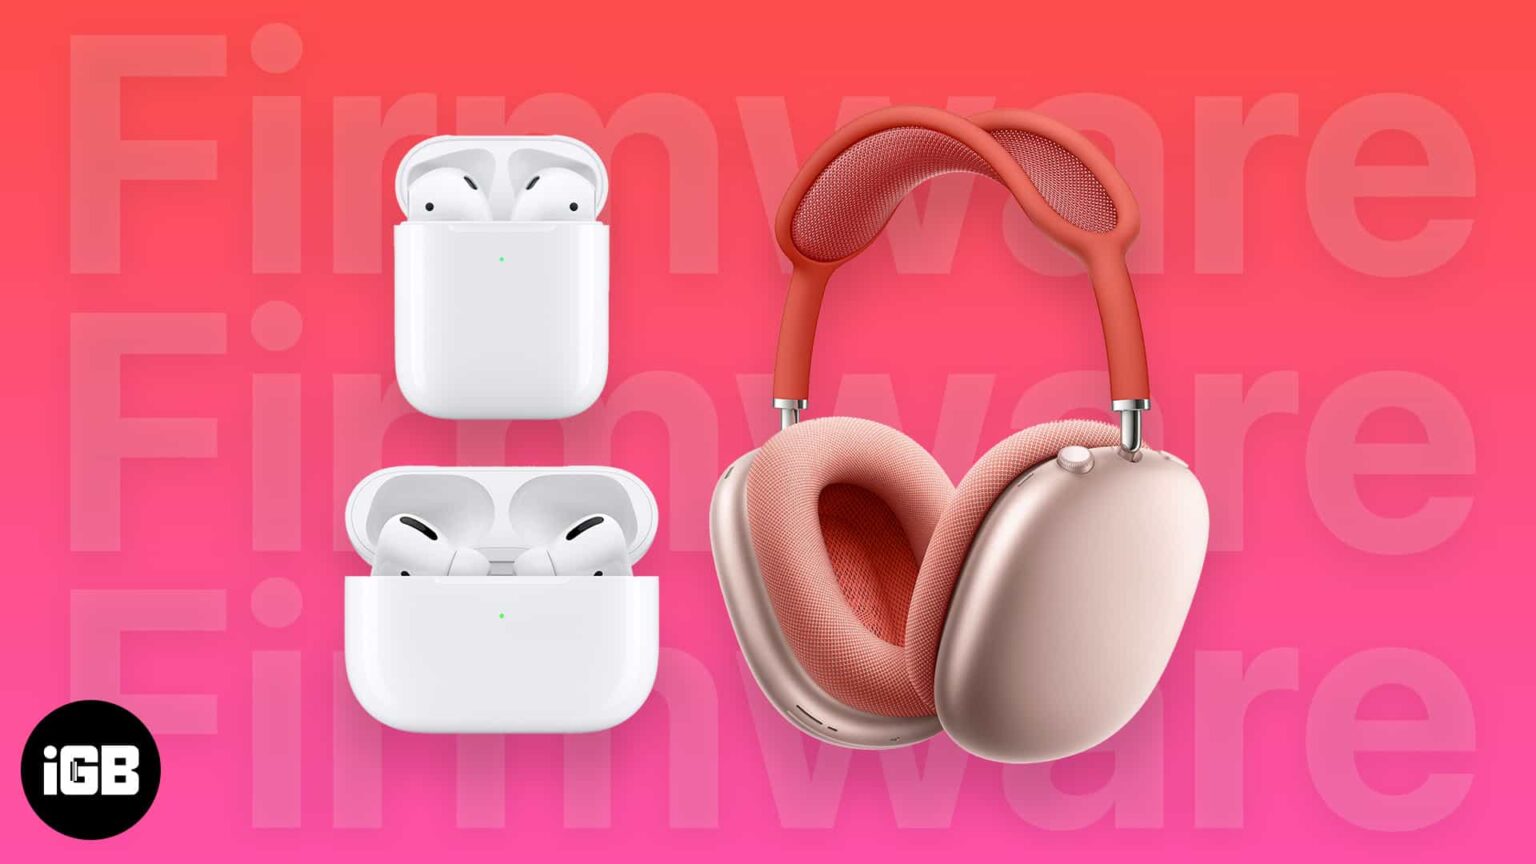 Daily Crunch: First impressions of the AirPods Max